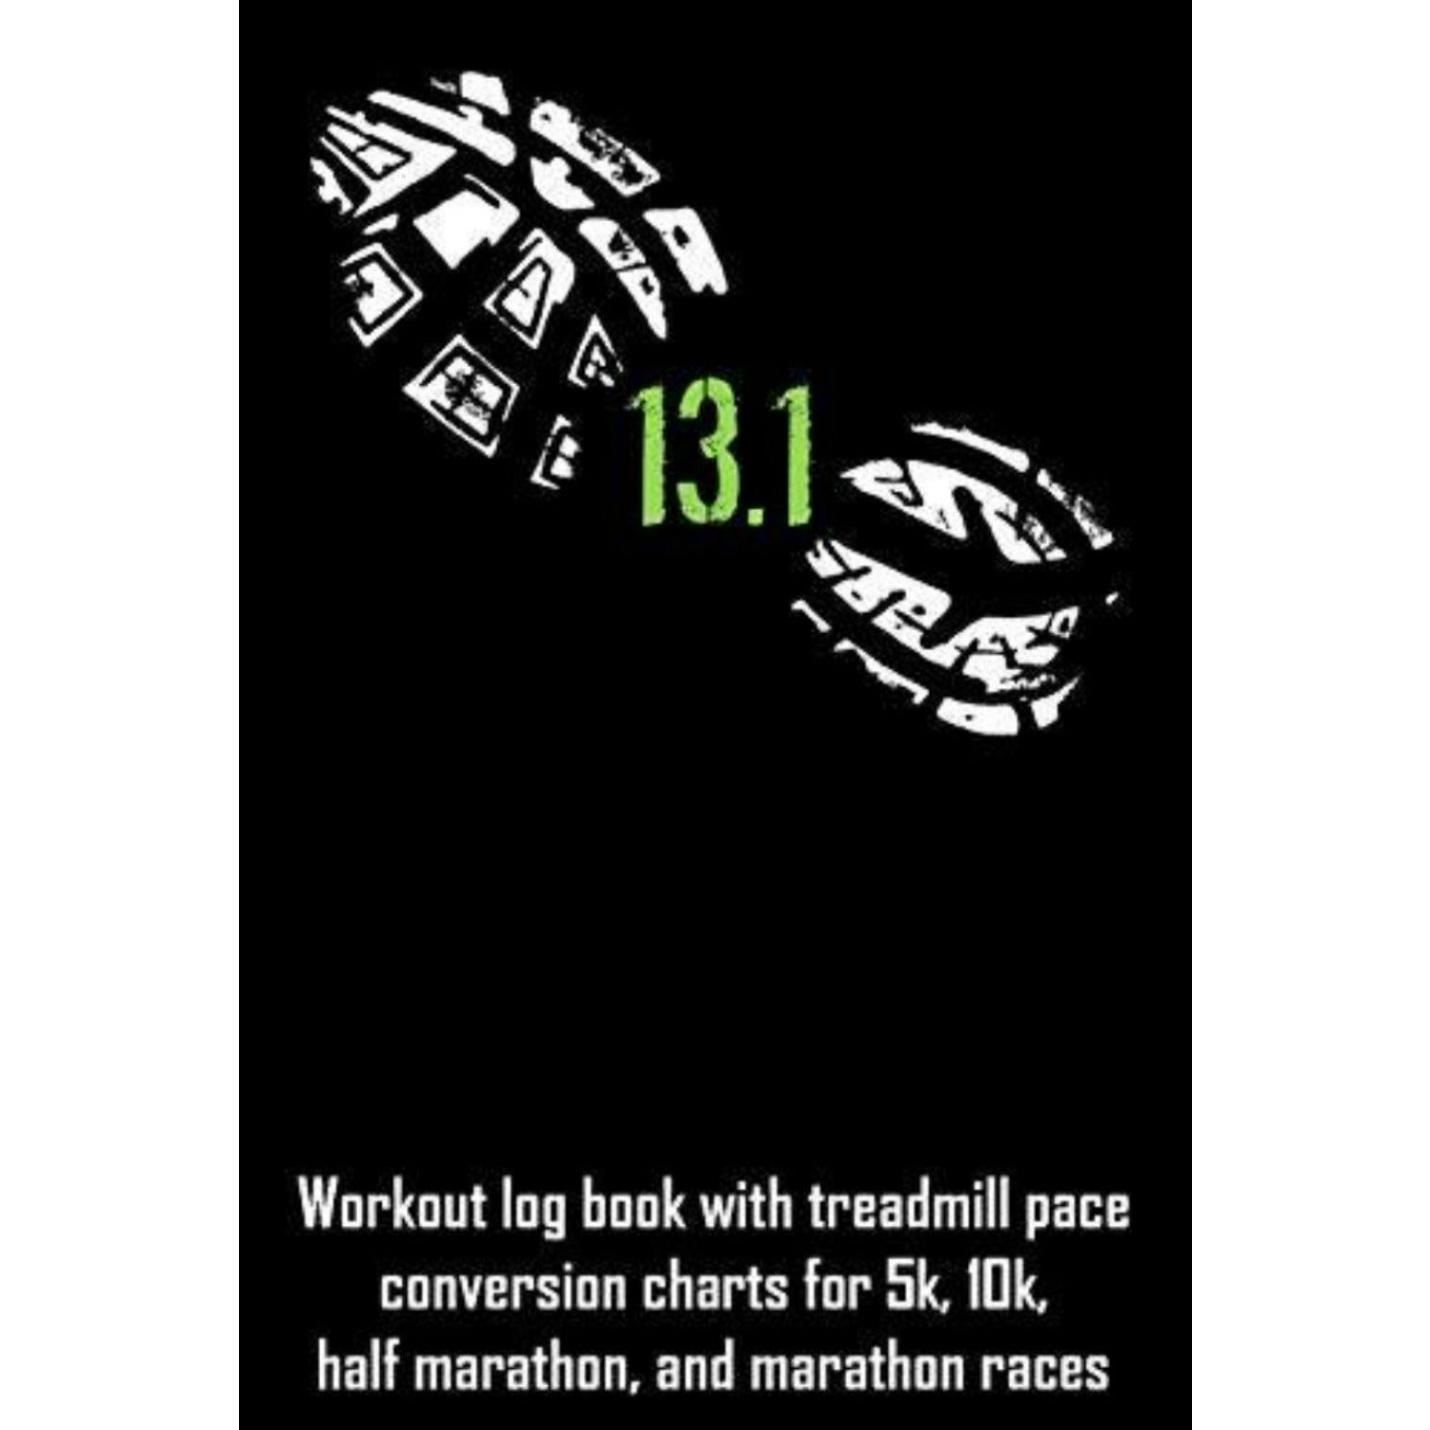 "Workout Log Book with Treadmill Pace Conversion Charts for 5K, 10K, Half-Marathon, and Marathon Races"